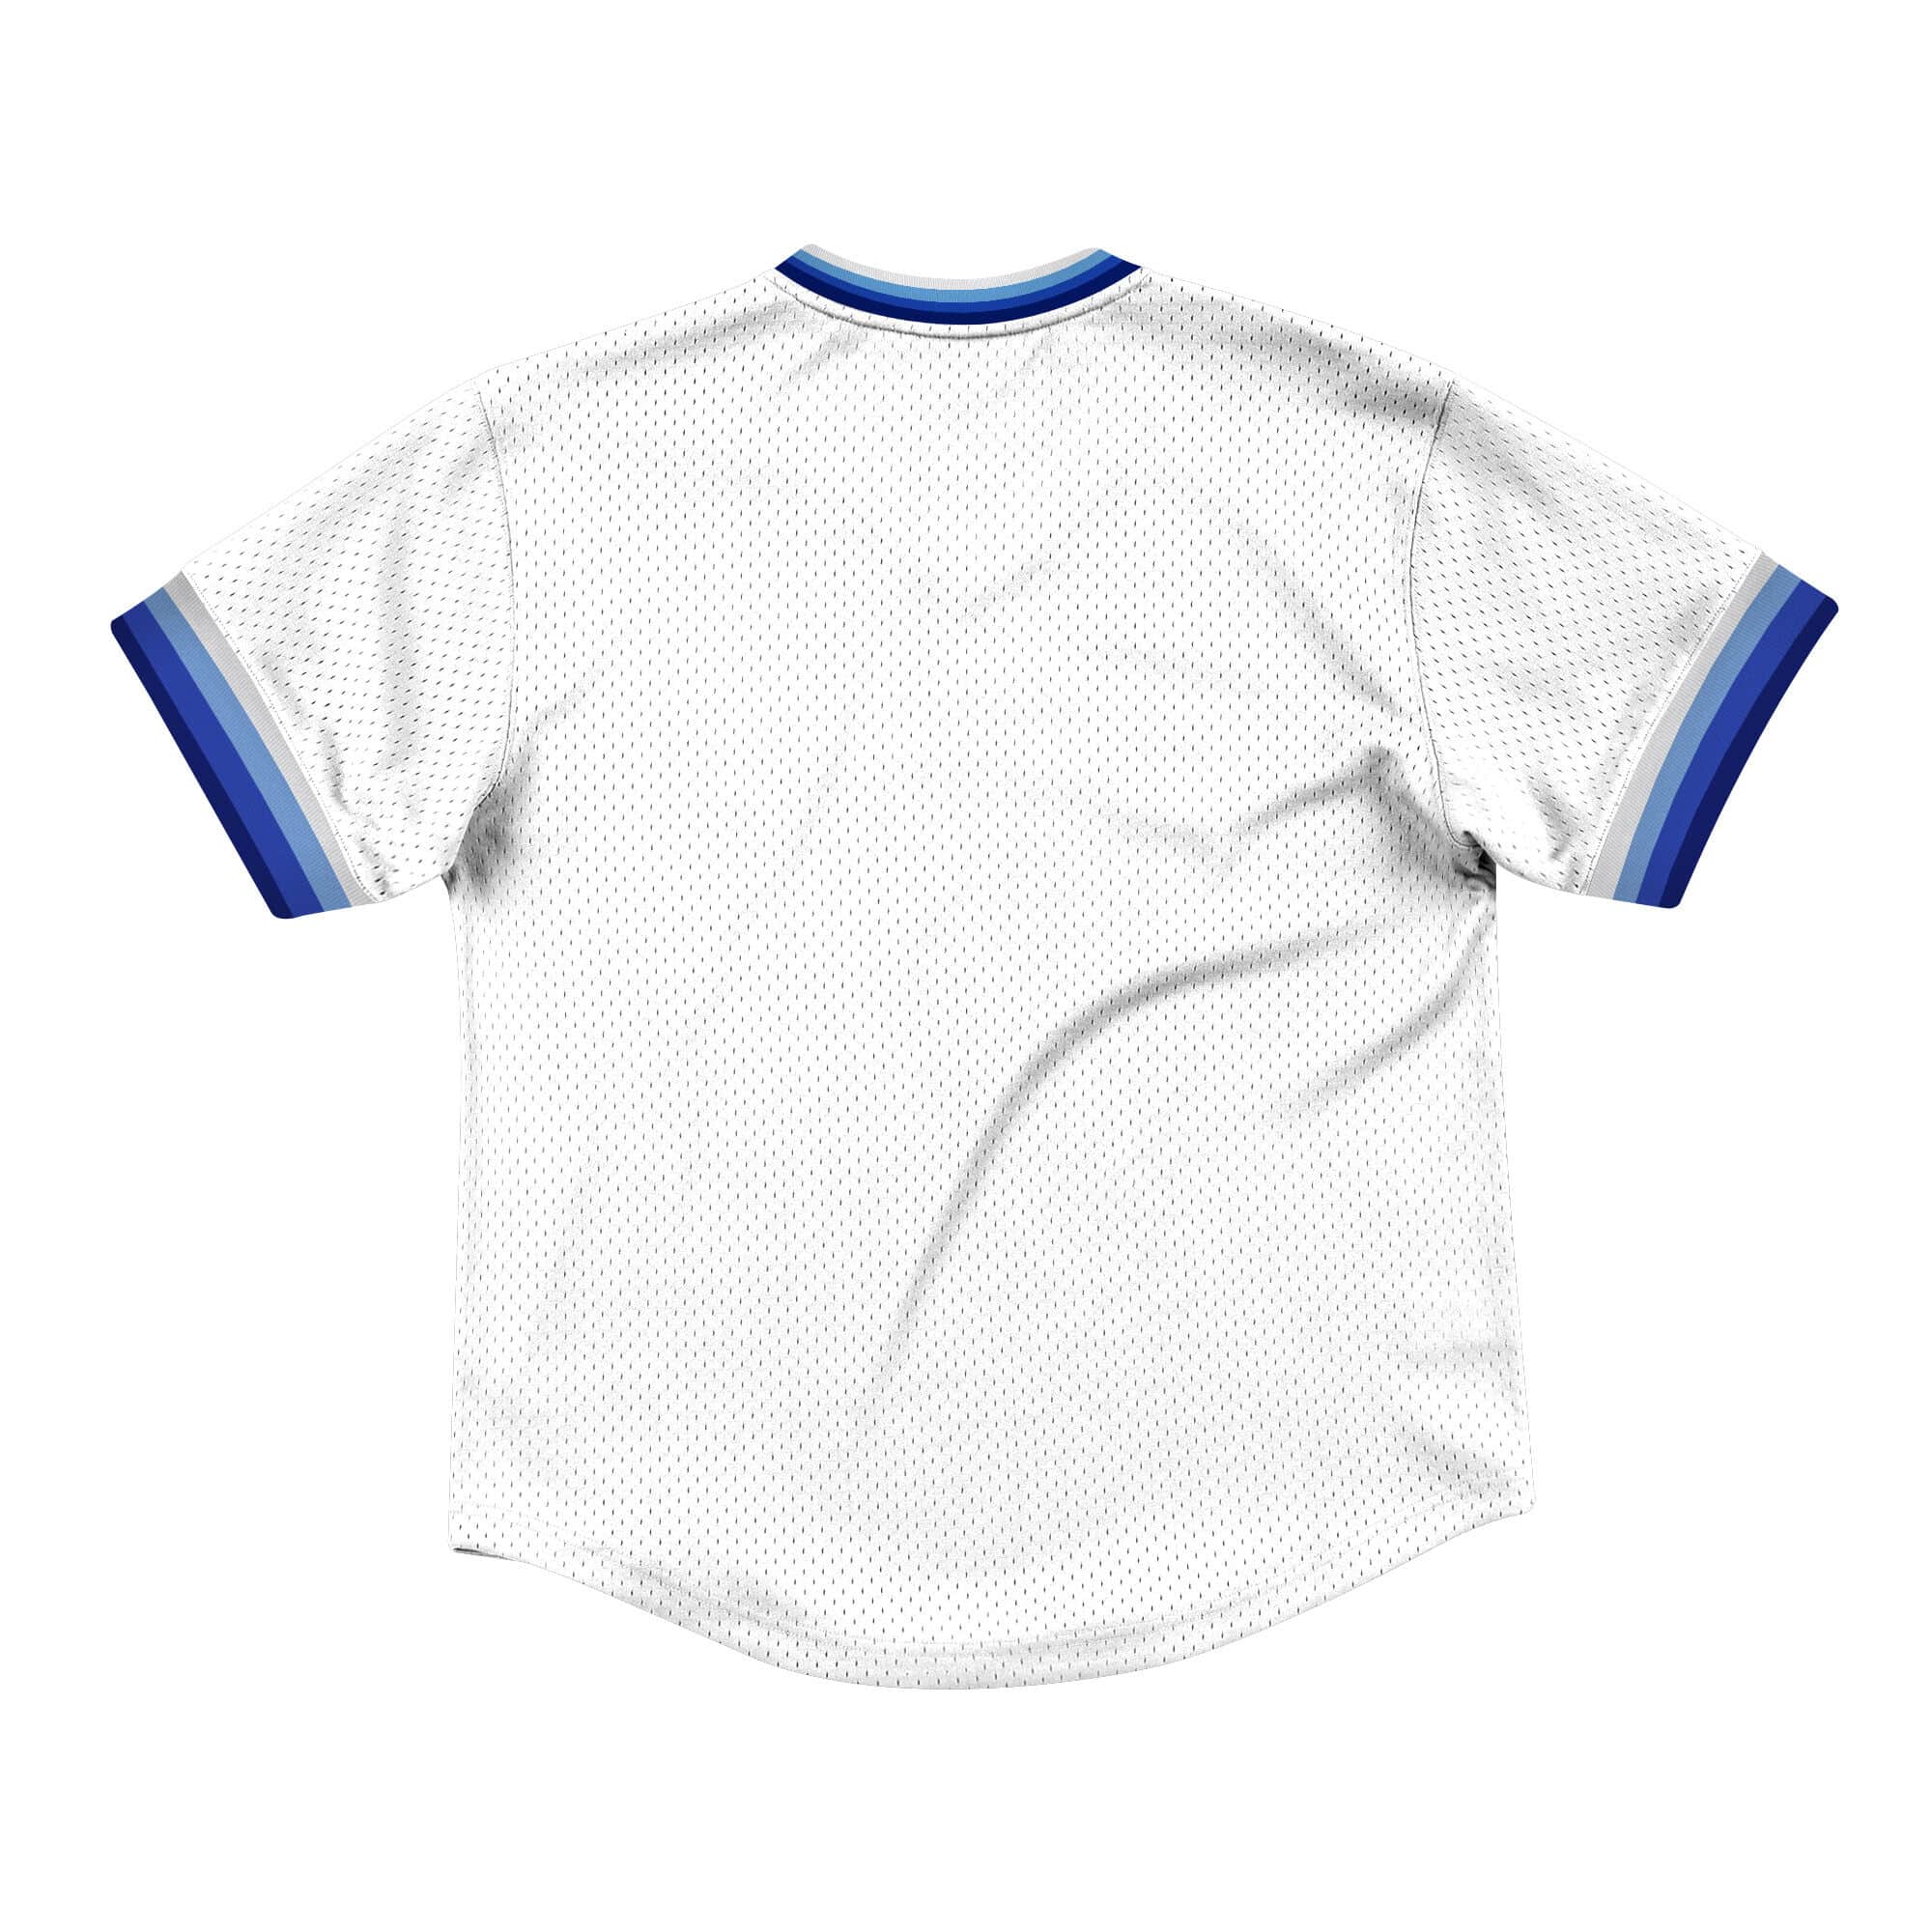 Lids Los Angeles Dodgers Stitches Cooperstown Collection Wordmark V-Neck  Jersey - White